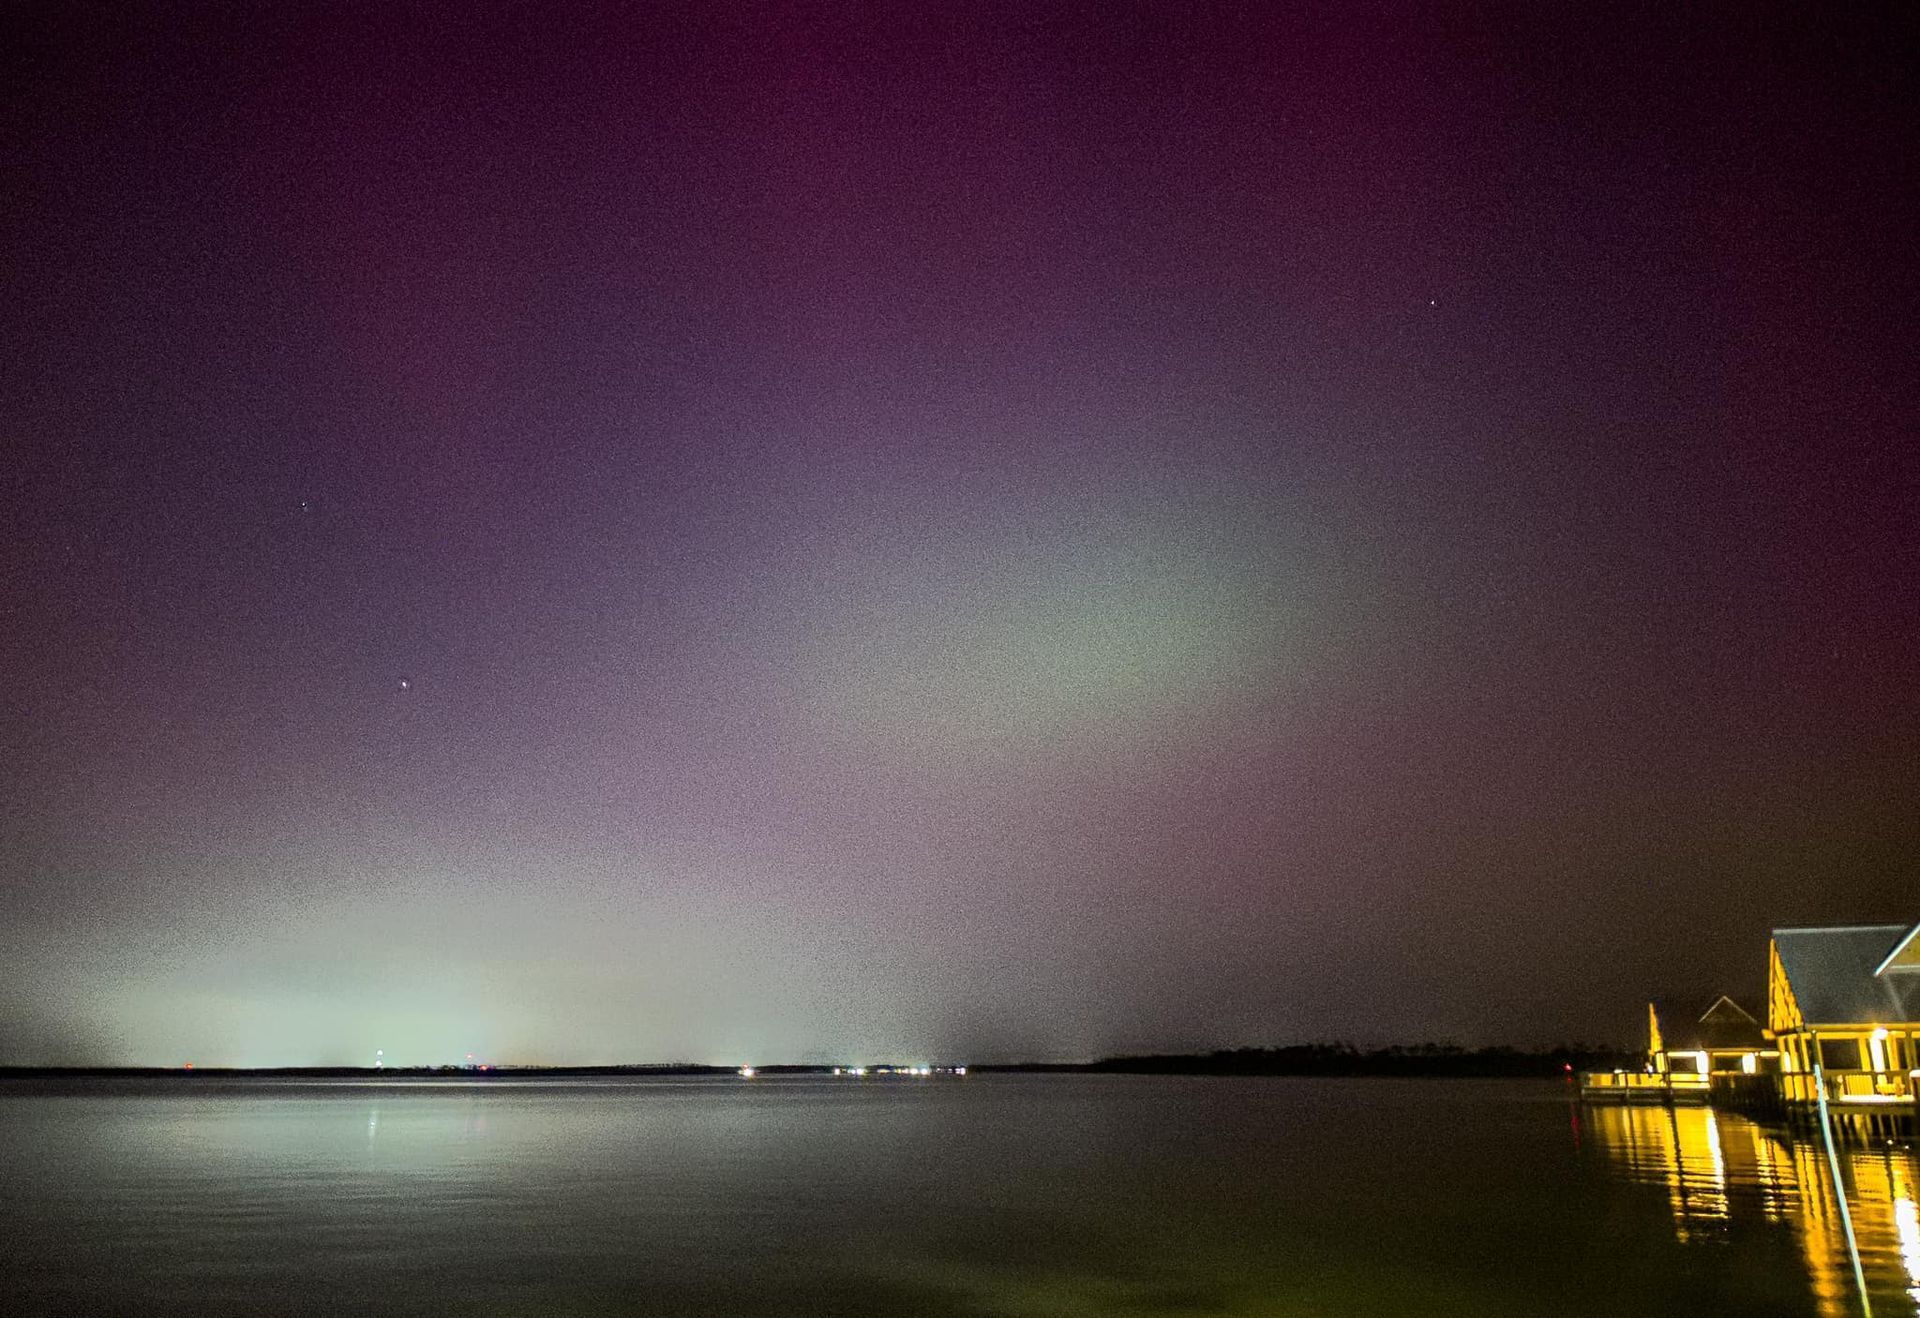 Northern Lights as viewed from the Orange Beach Waterfront Park - Photo by Dave John Kriegler, Astro